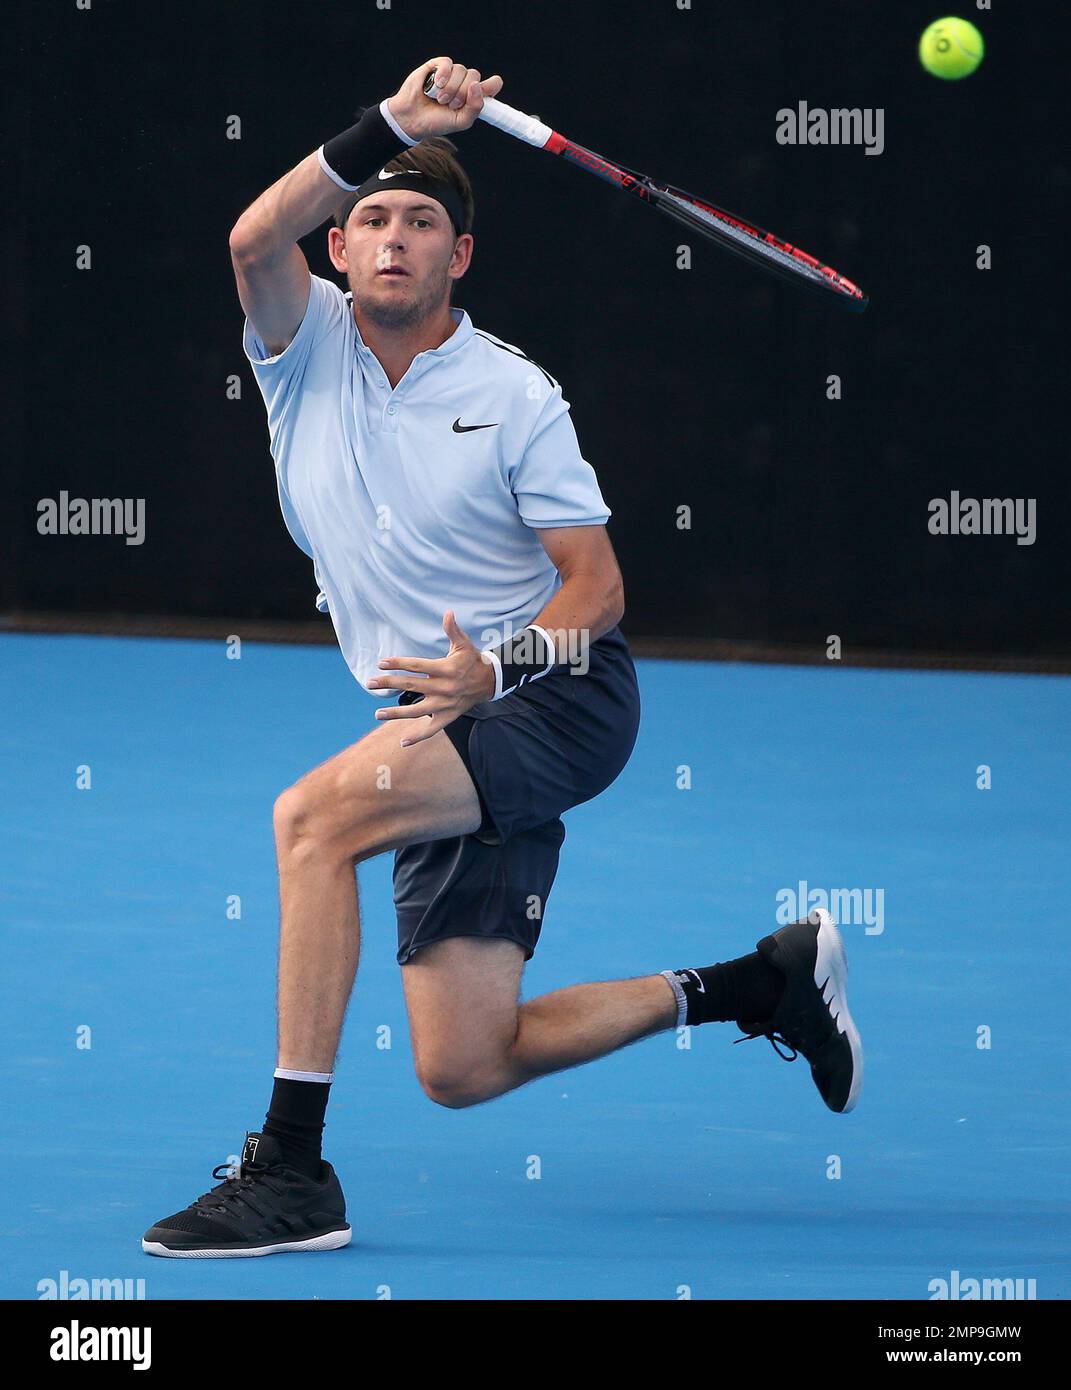 Jared Donaldson of the U.S. hits a forehand to Gilles Simon of France in  their men's singles match at the Sydney International tennis tournament in  Sydney, Tuesday, Jan. 9, 2018. (AP Photo/Rick